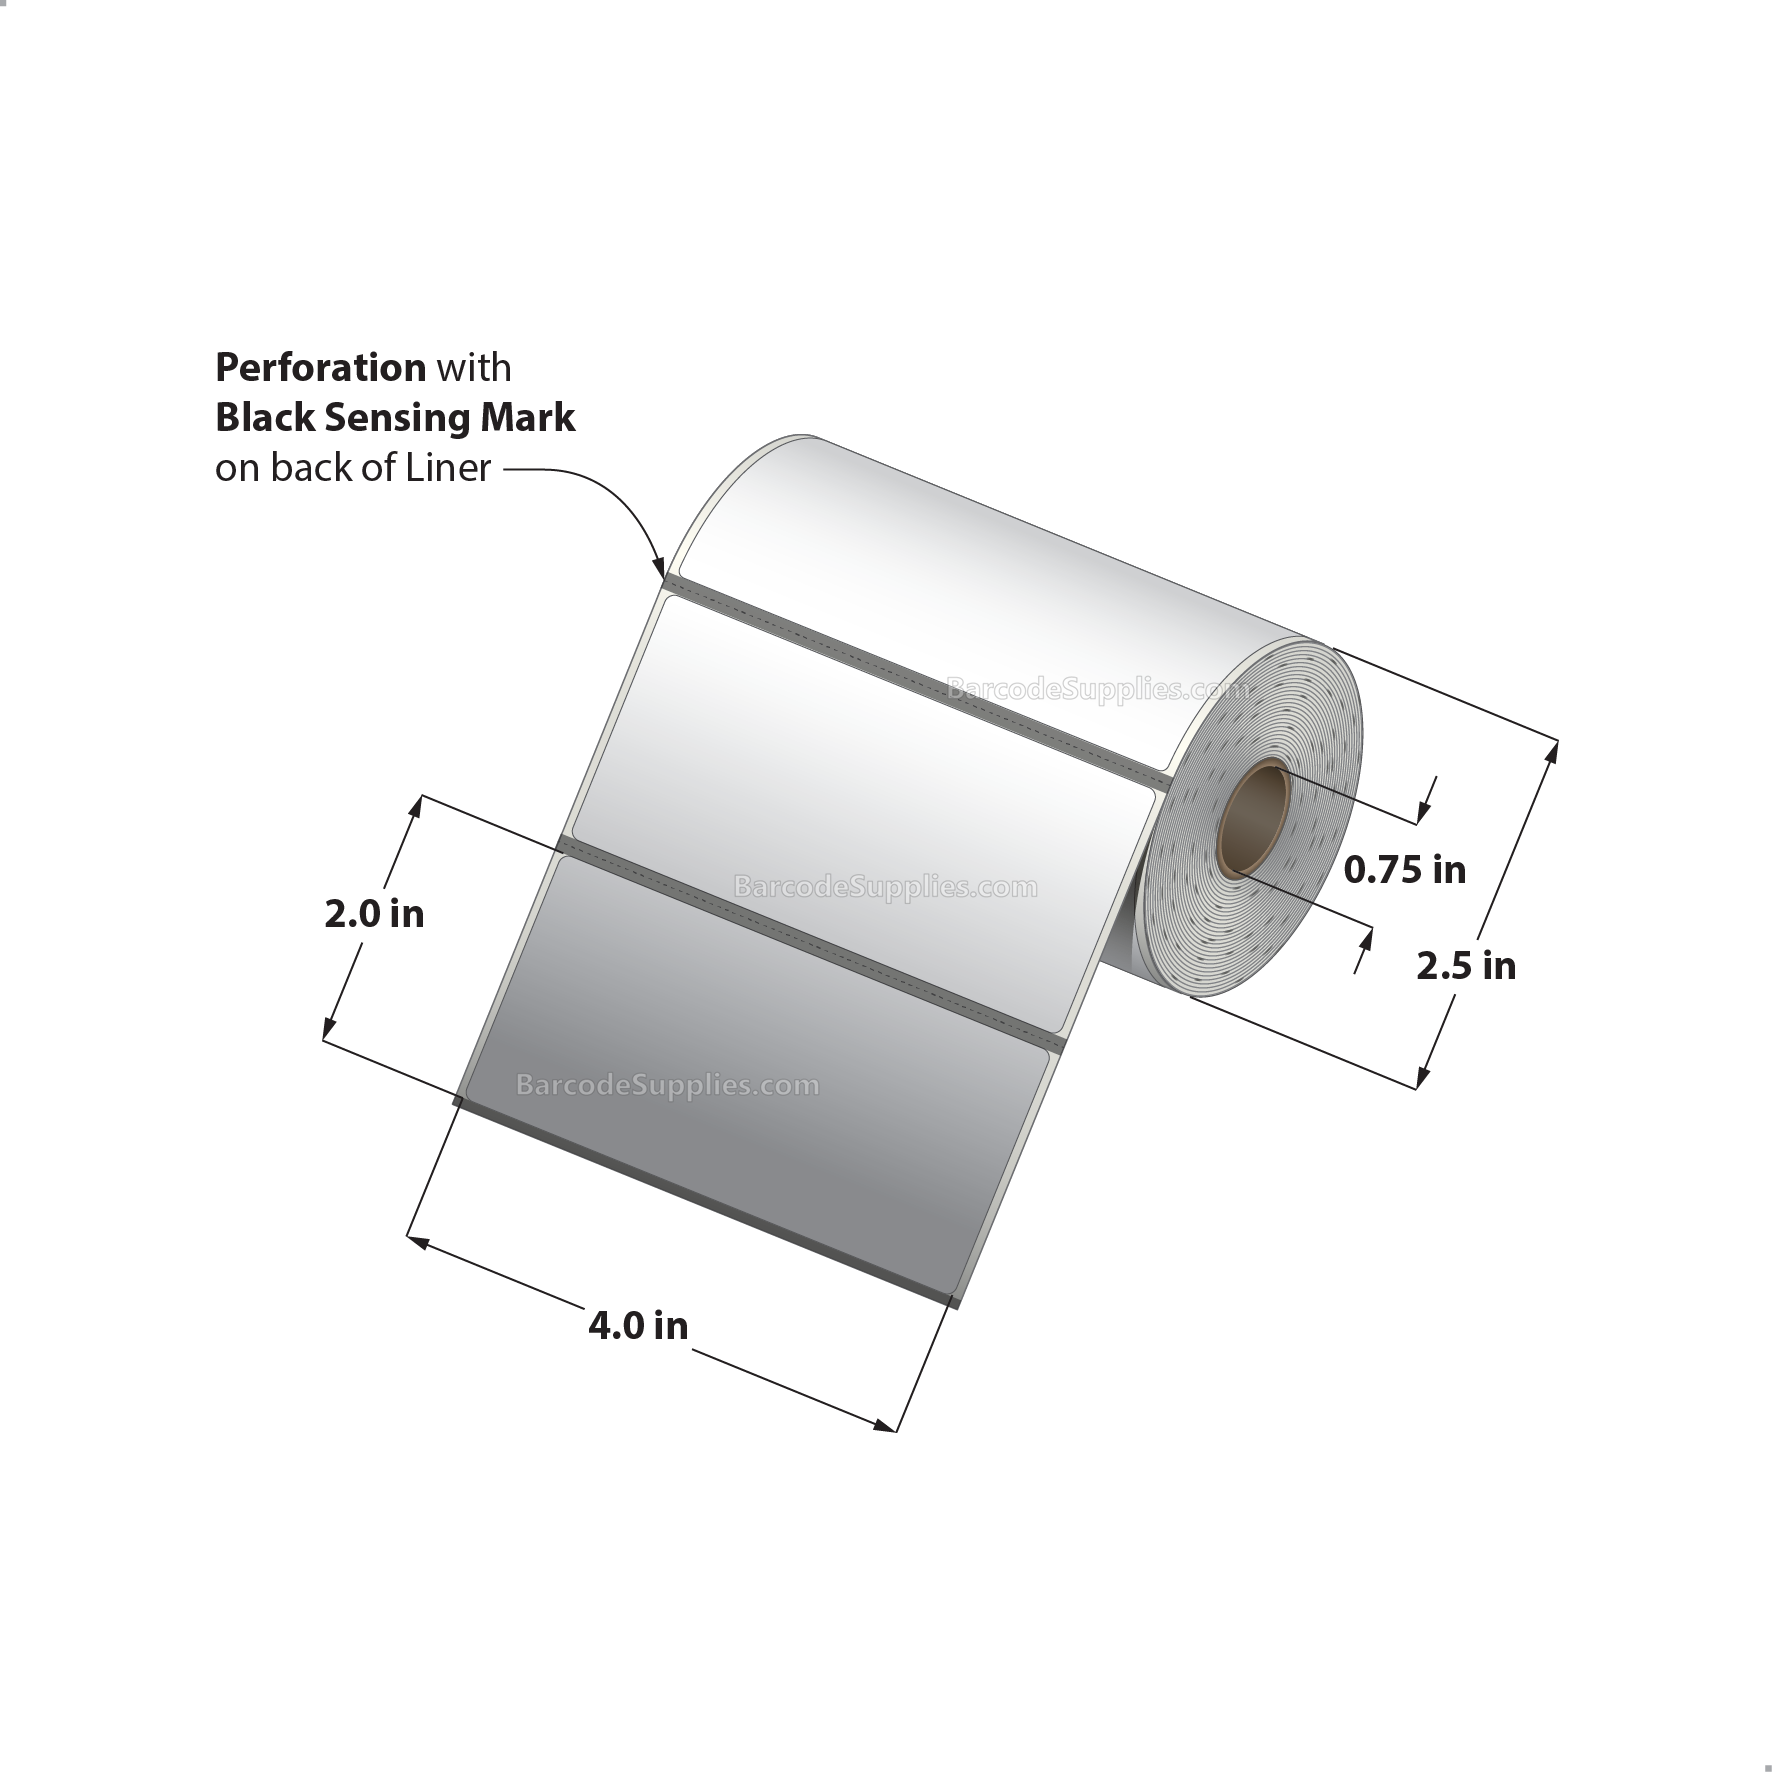 4 x 2 Direct Thermal White Labels With Acrylic Adhesive - Perforated - 300 Labels Per Roll - Carton Of 36 Rolls - 10800 Labels Total - MPN: RD-4-2-300-075